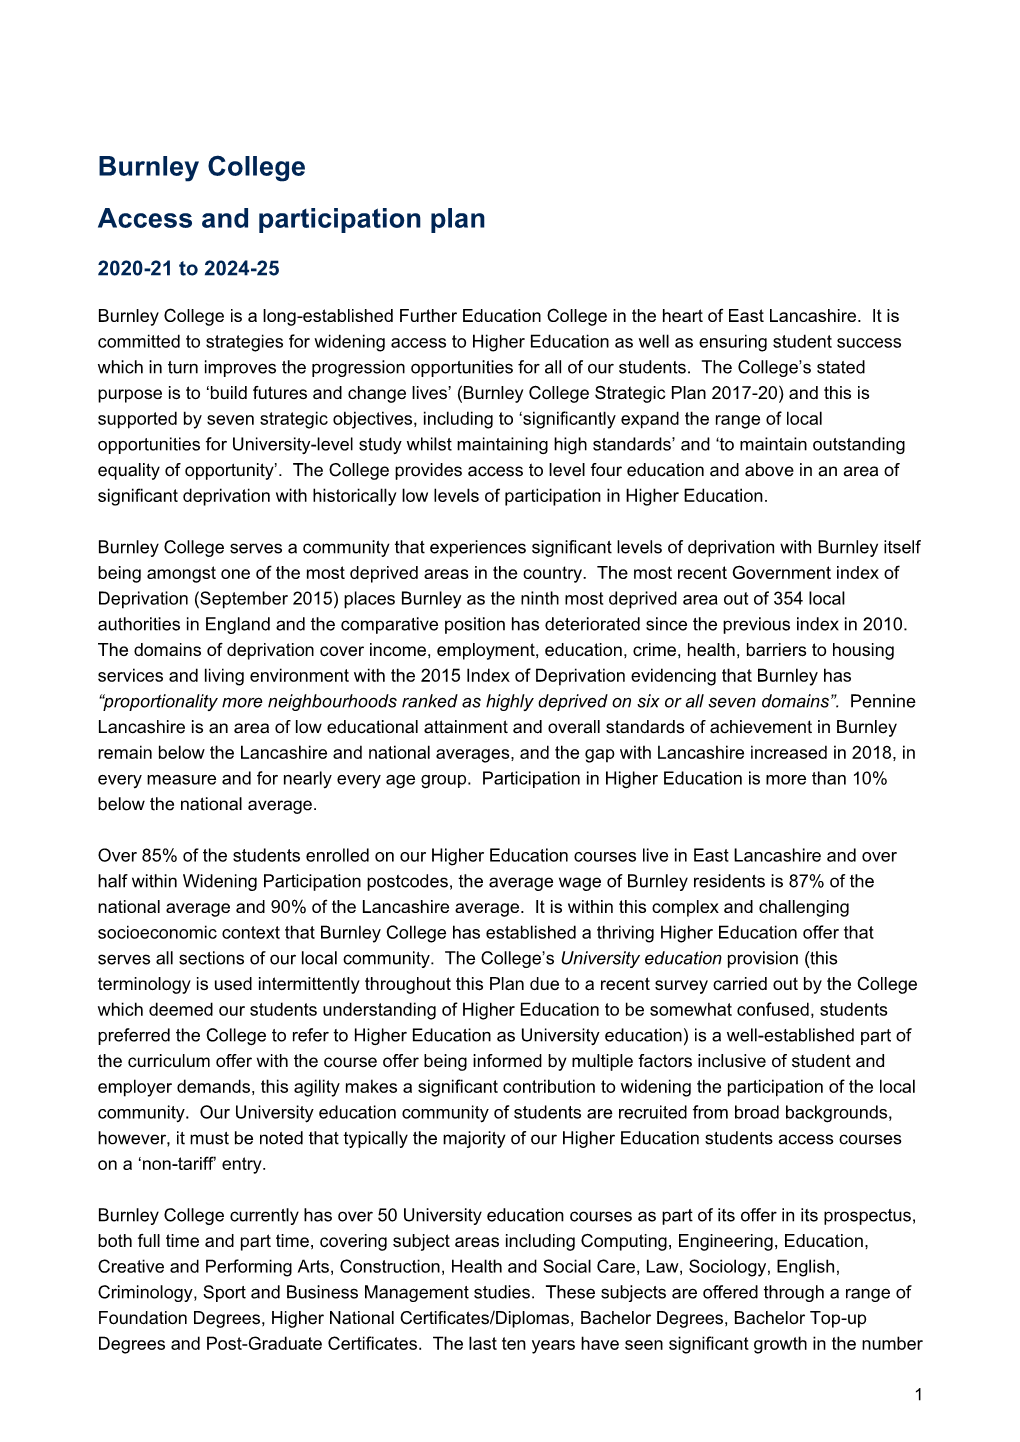 Burnley College Access and Participation Plan